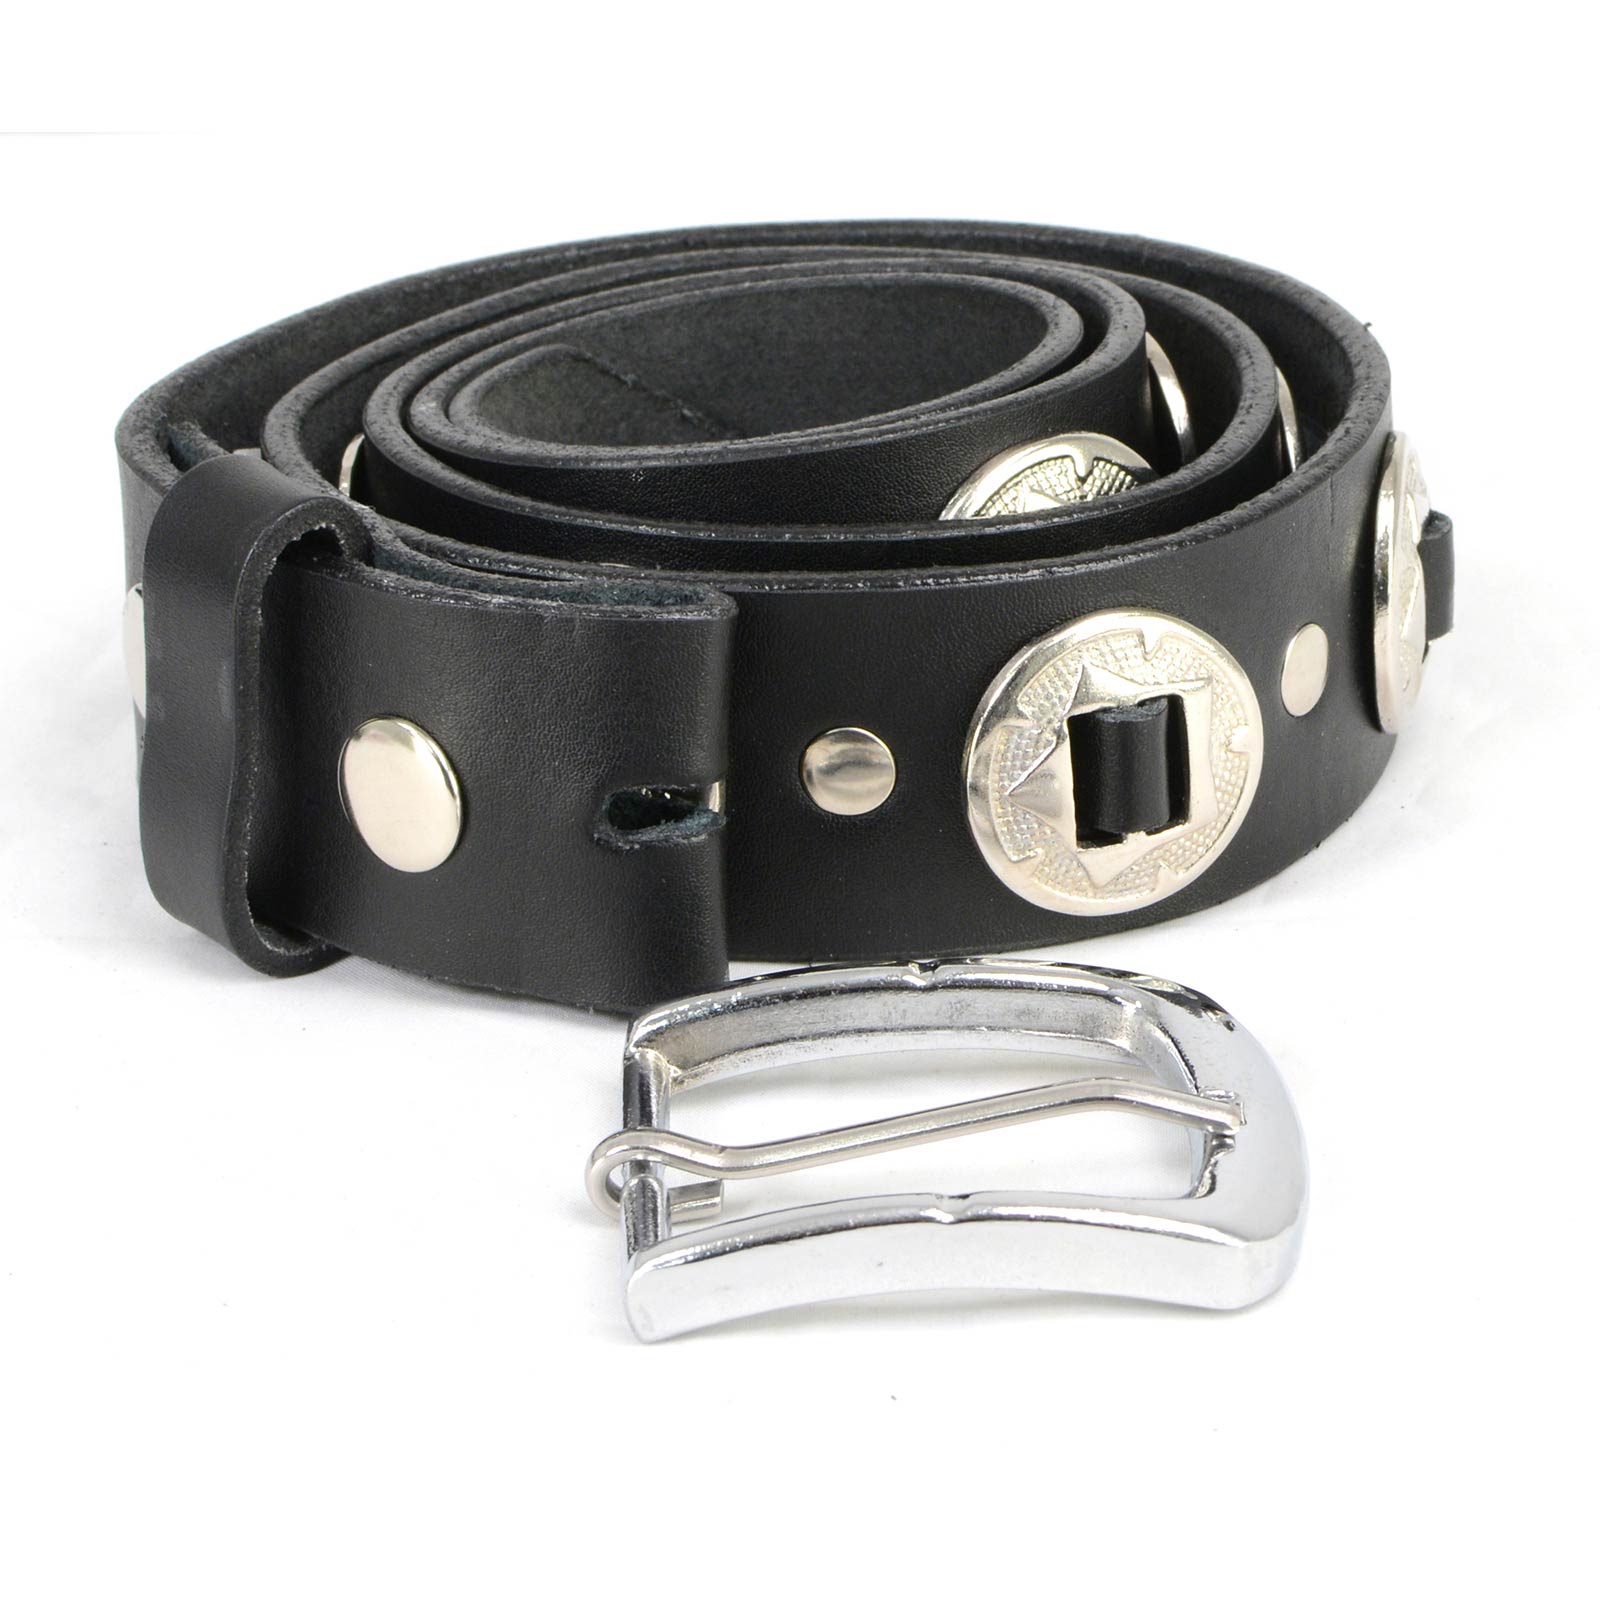 Milwaukee Leather MP7120 Men's Chrome Conchos - Black Genuine Leather Belt with Interchangeable Buckle - 1.5 inches Wide